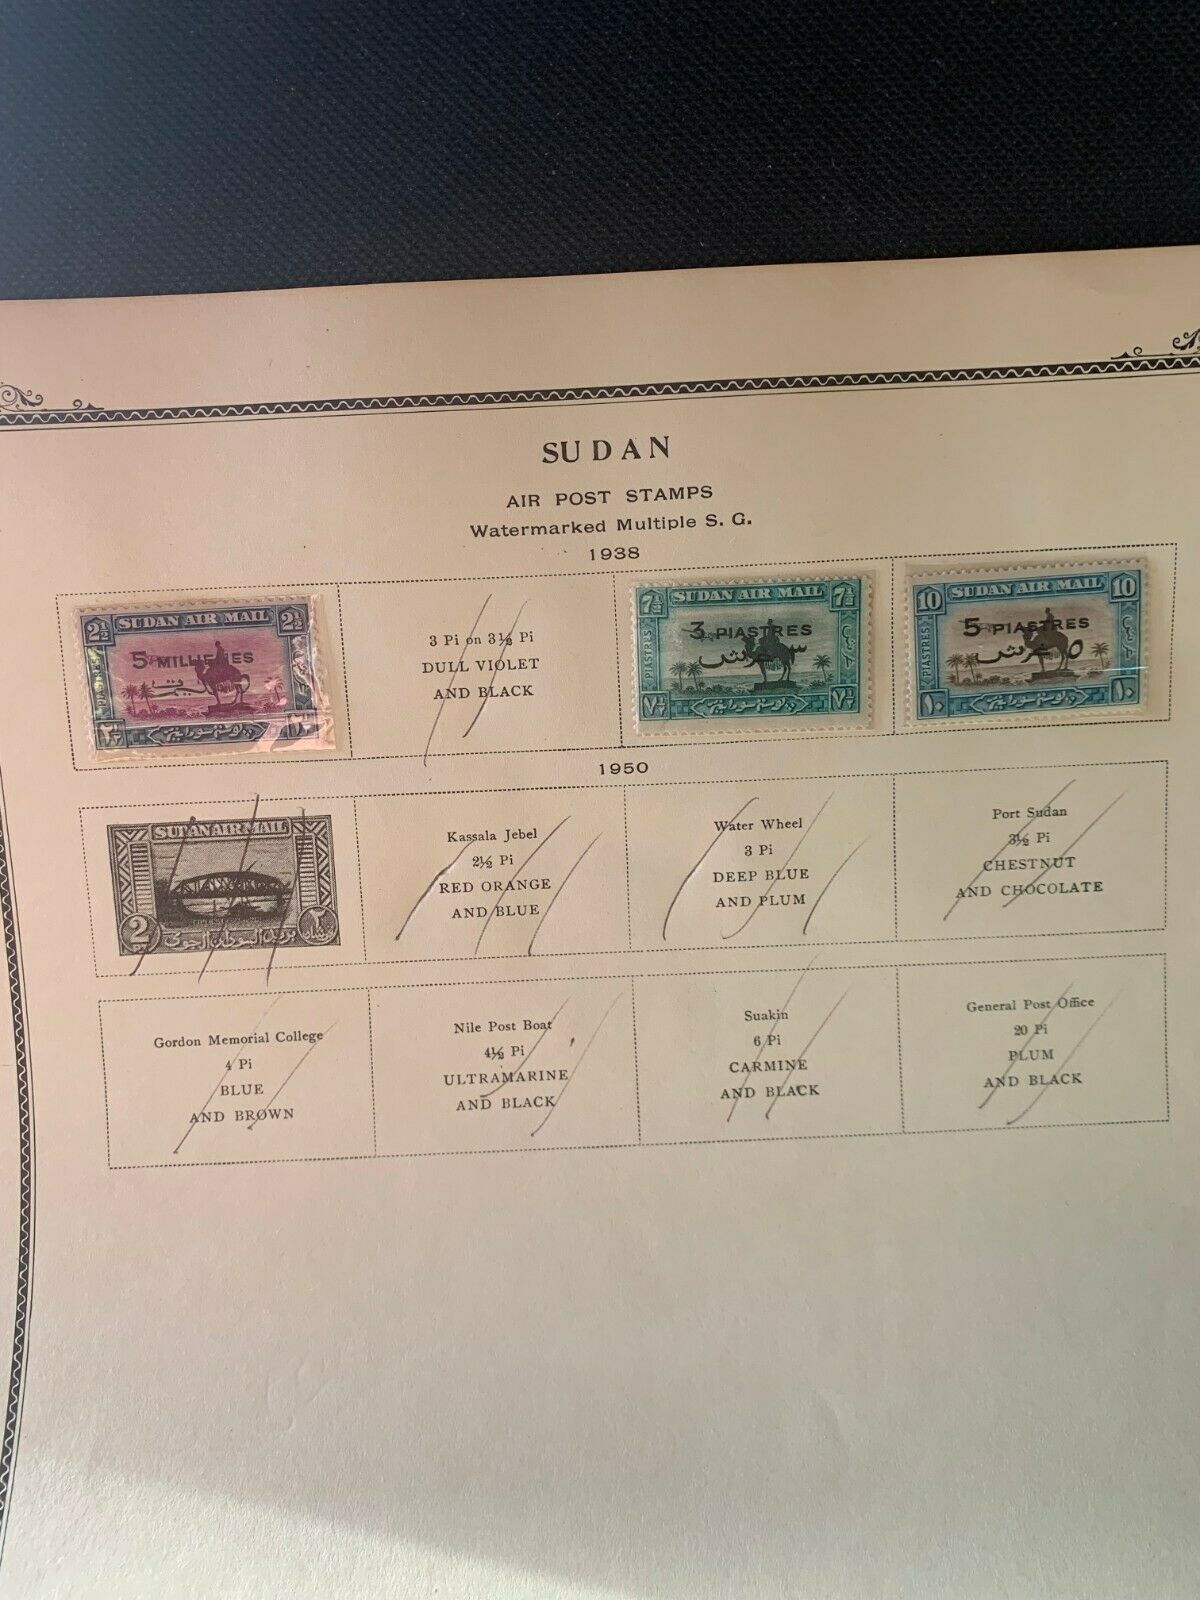 1938 Sudan Stamps Various Air Mail Mint Stamps Milliemes Piastres C60